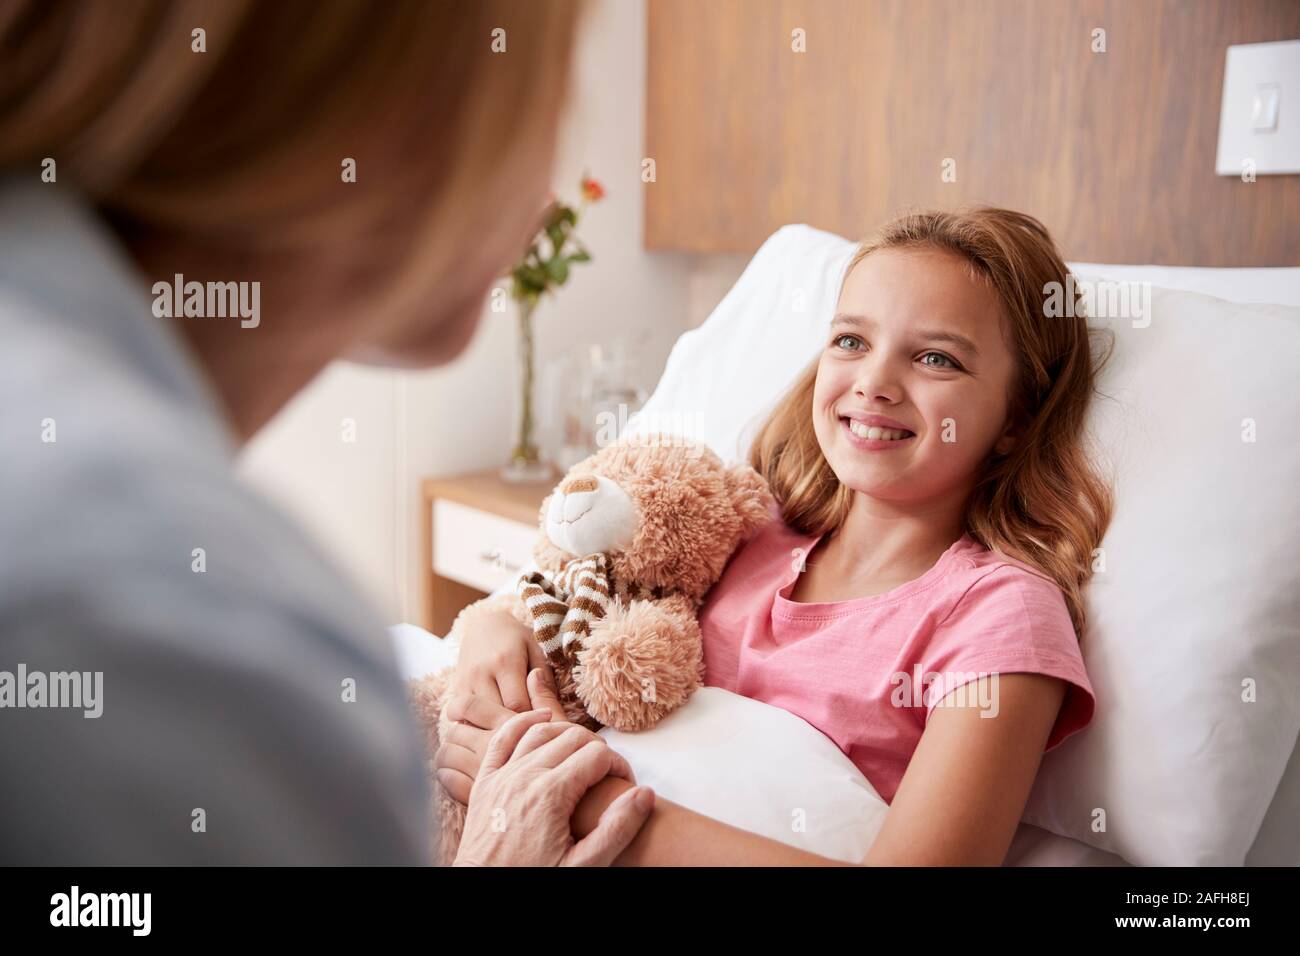 Mother Visiting Daughter Lying In Bed In Hospital Ward Stock Photo